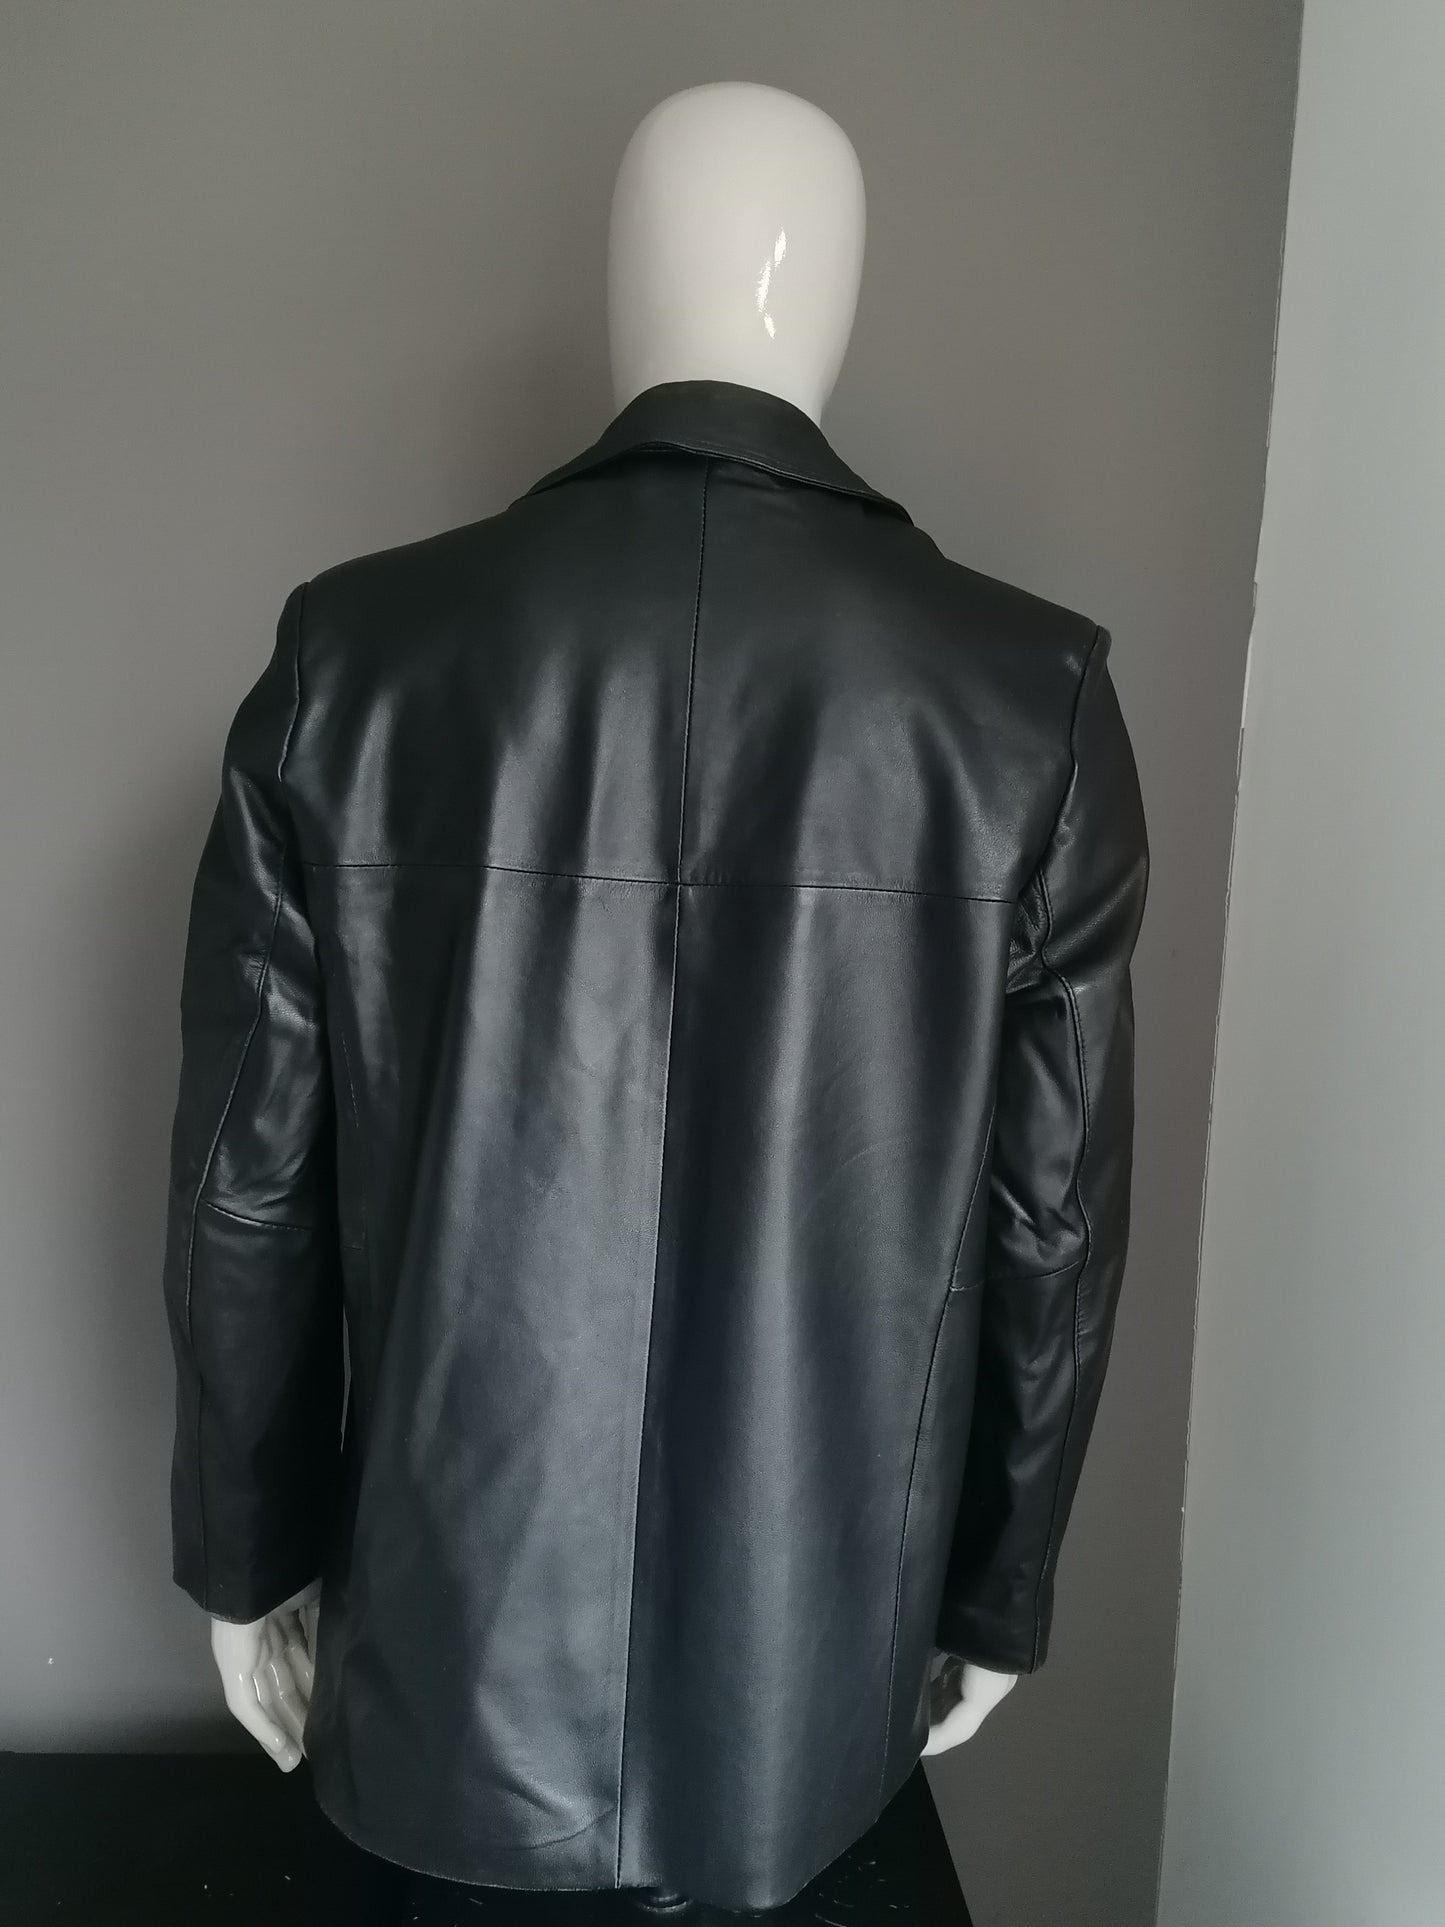 L&B Leather fashion leather jacket with buttons. Black smooth soft leather. Size 54 / L.